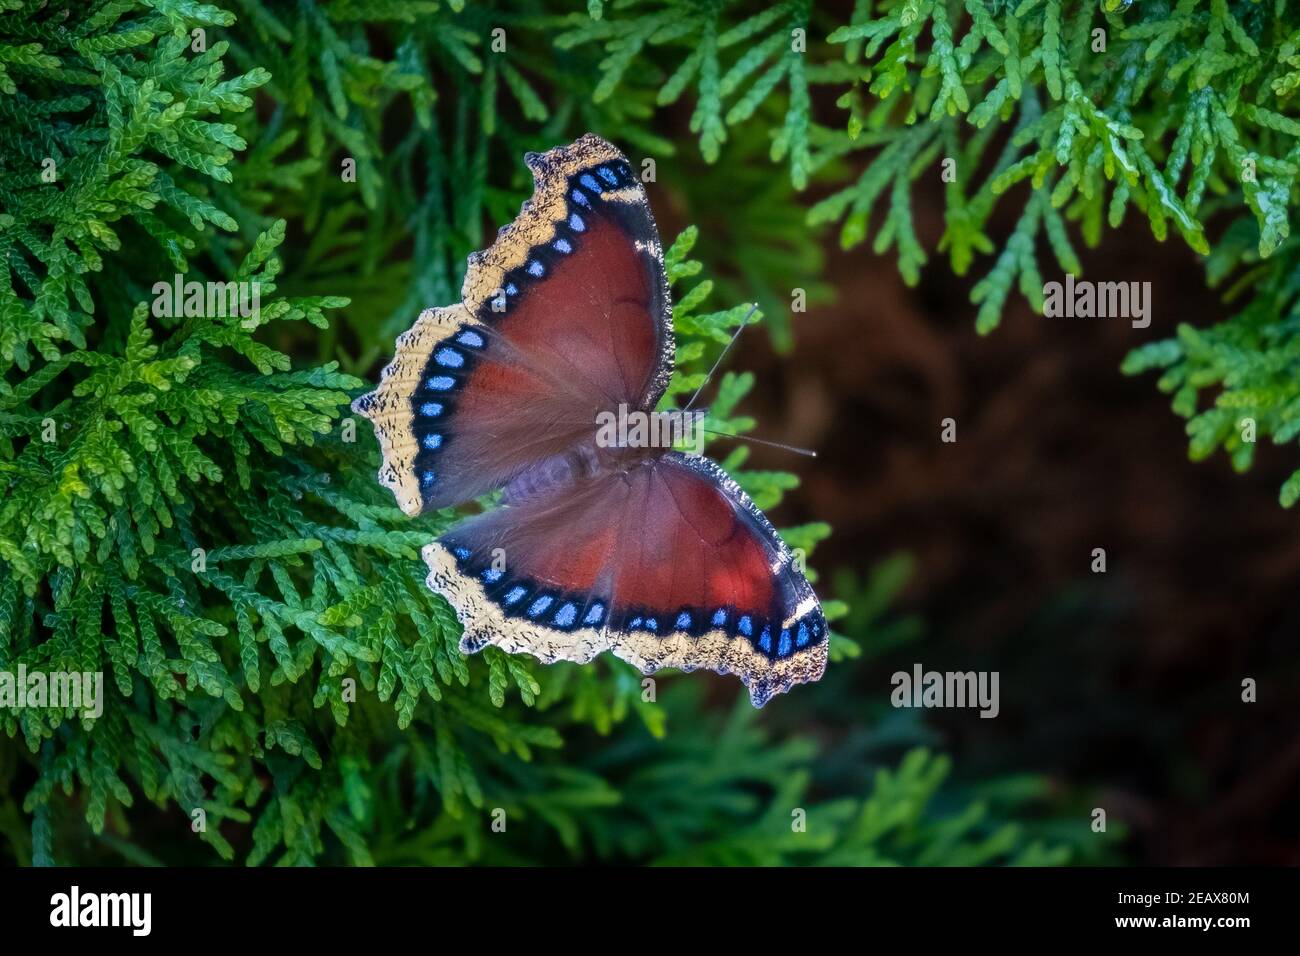 A Mourning Cloak Butterfly (Nymphalis antiopa) resting on an Arborvitae branch. Stock Photo